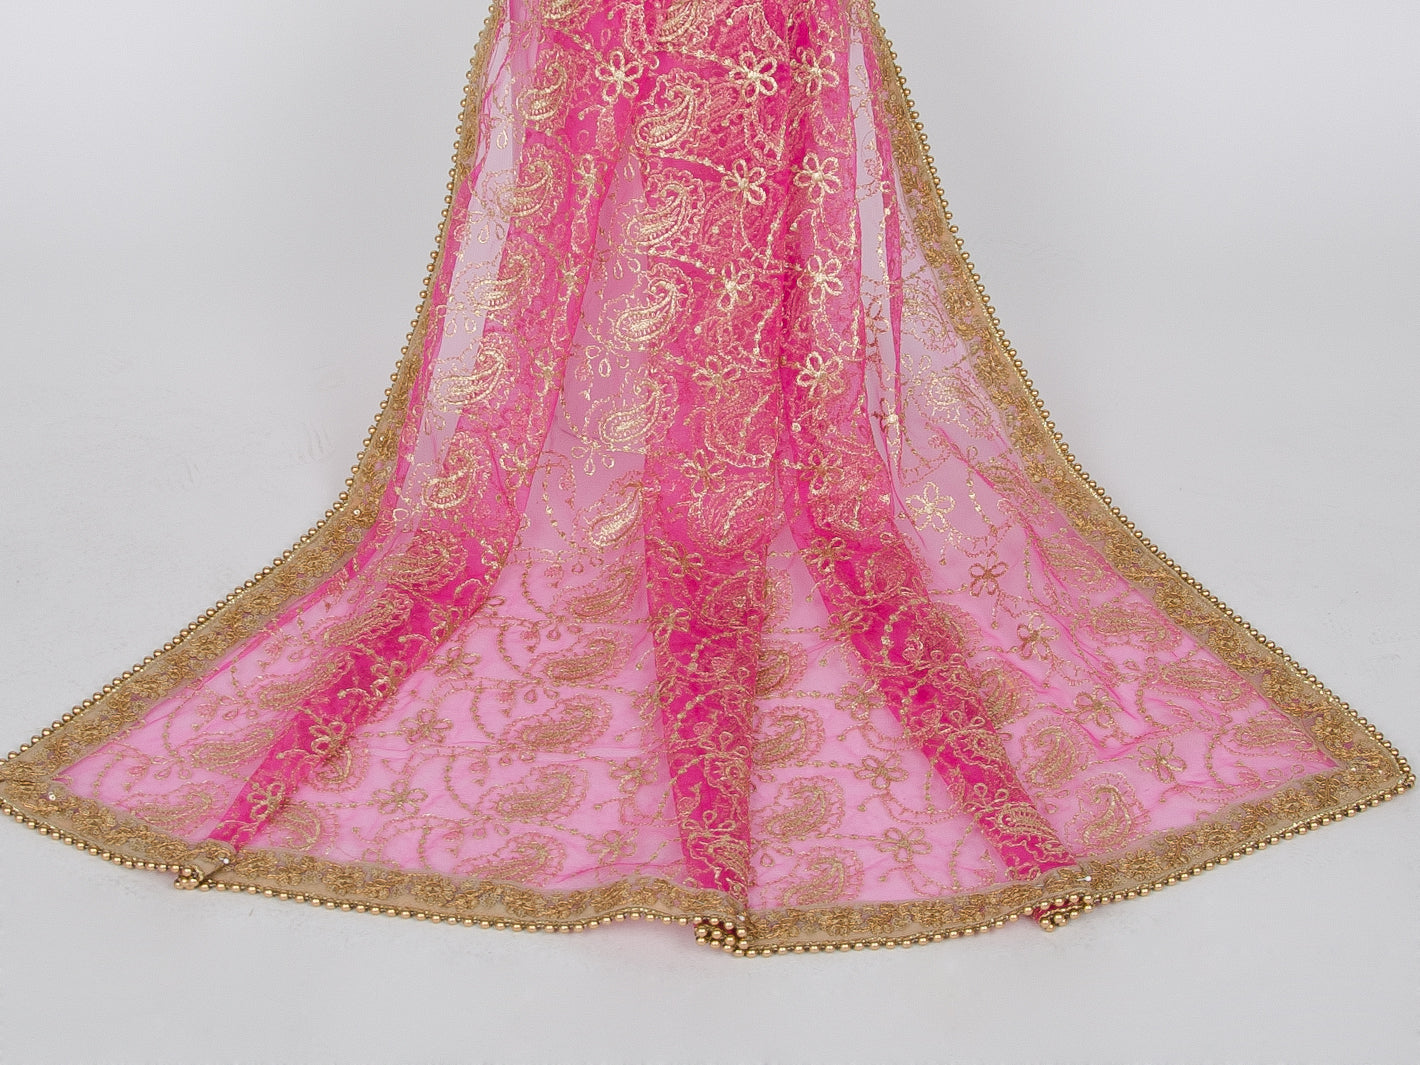 Hot Pink Netting Embroidered Dupatta - Roop Darshan